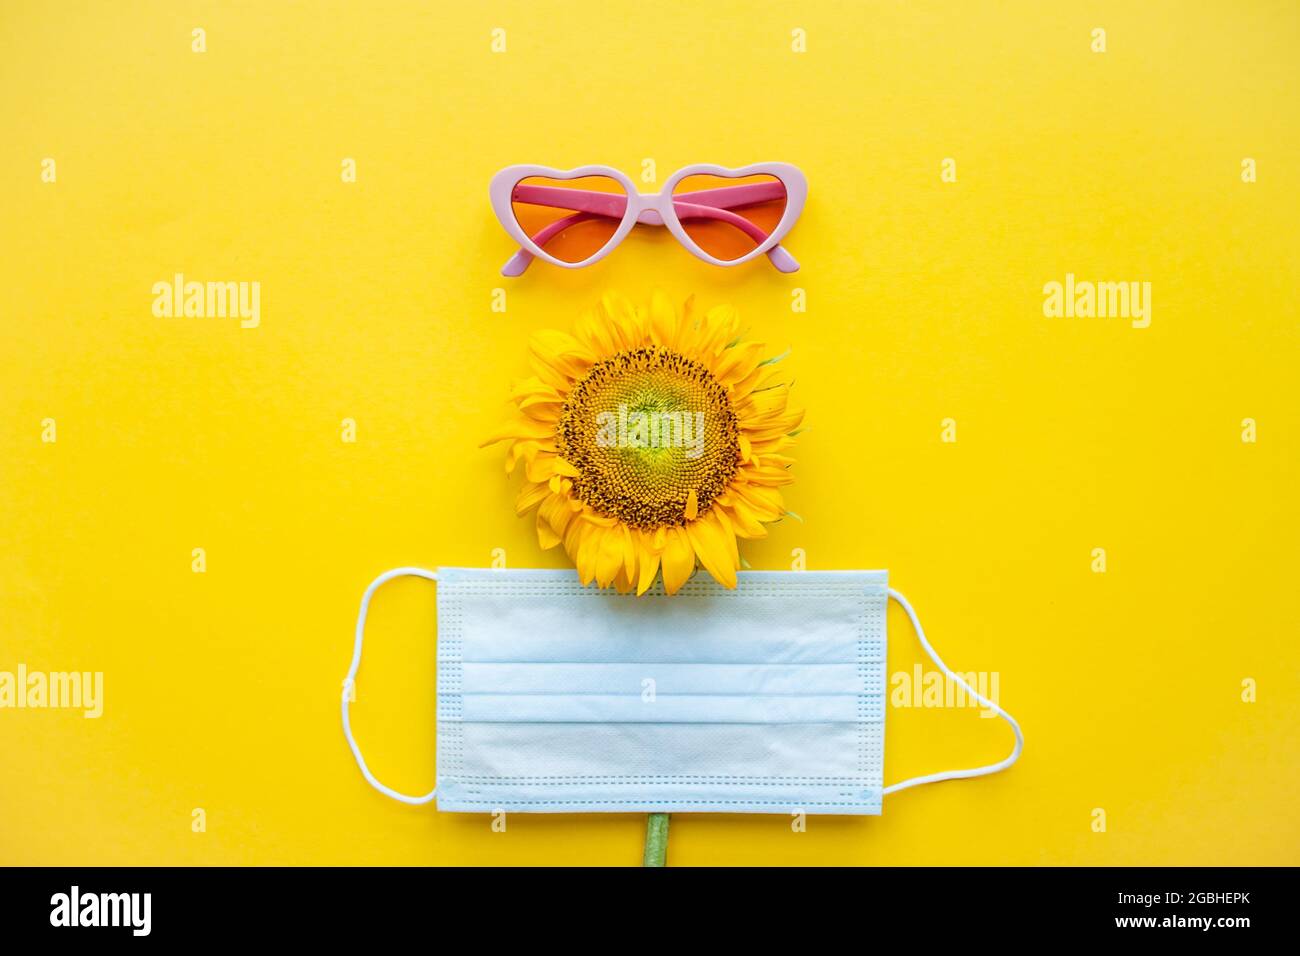 Funny face made of pink heart-shaped sunglasses, a protective medical mask and a sunflower on a bright yellow background Stock Photo